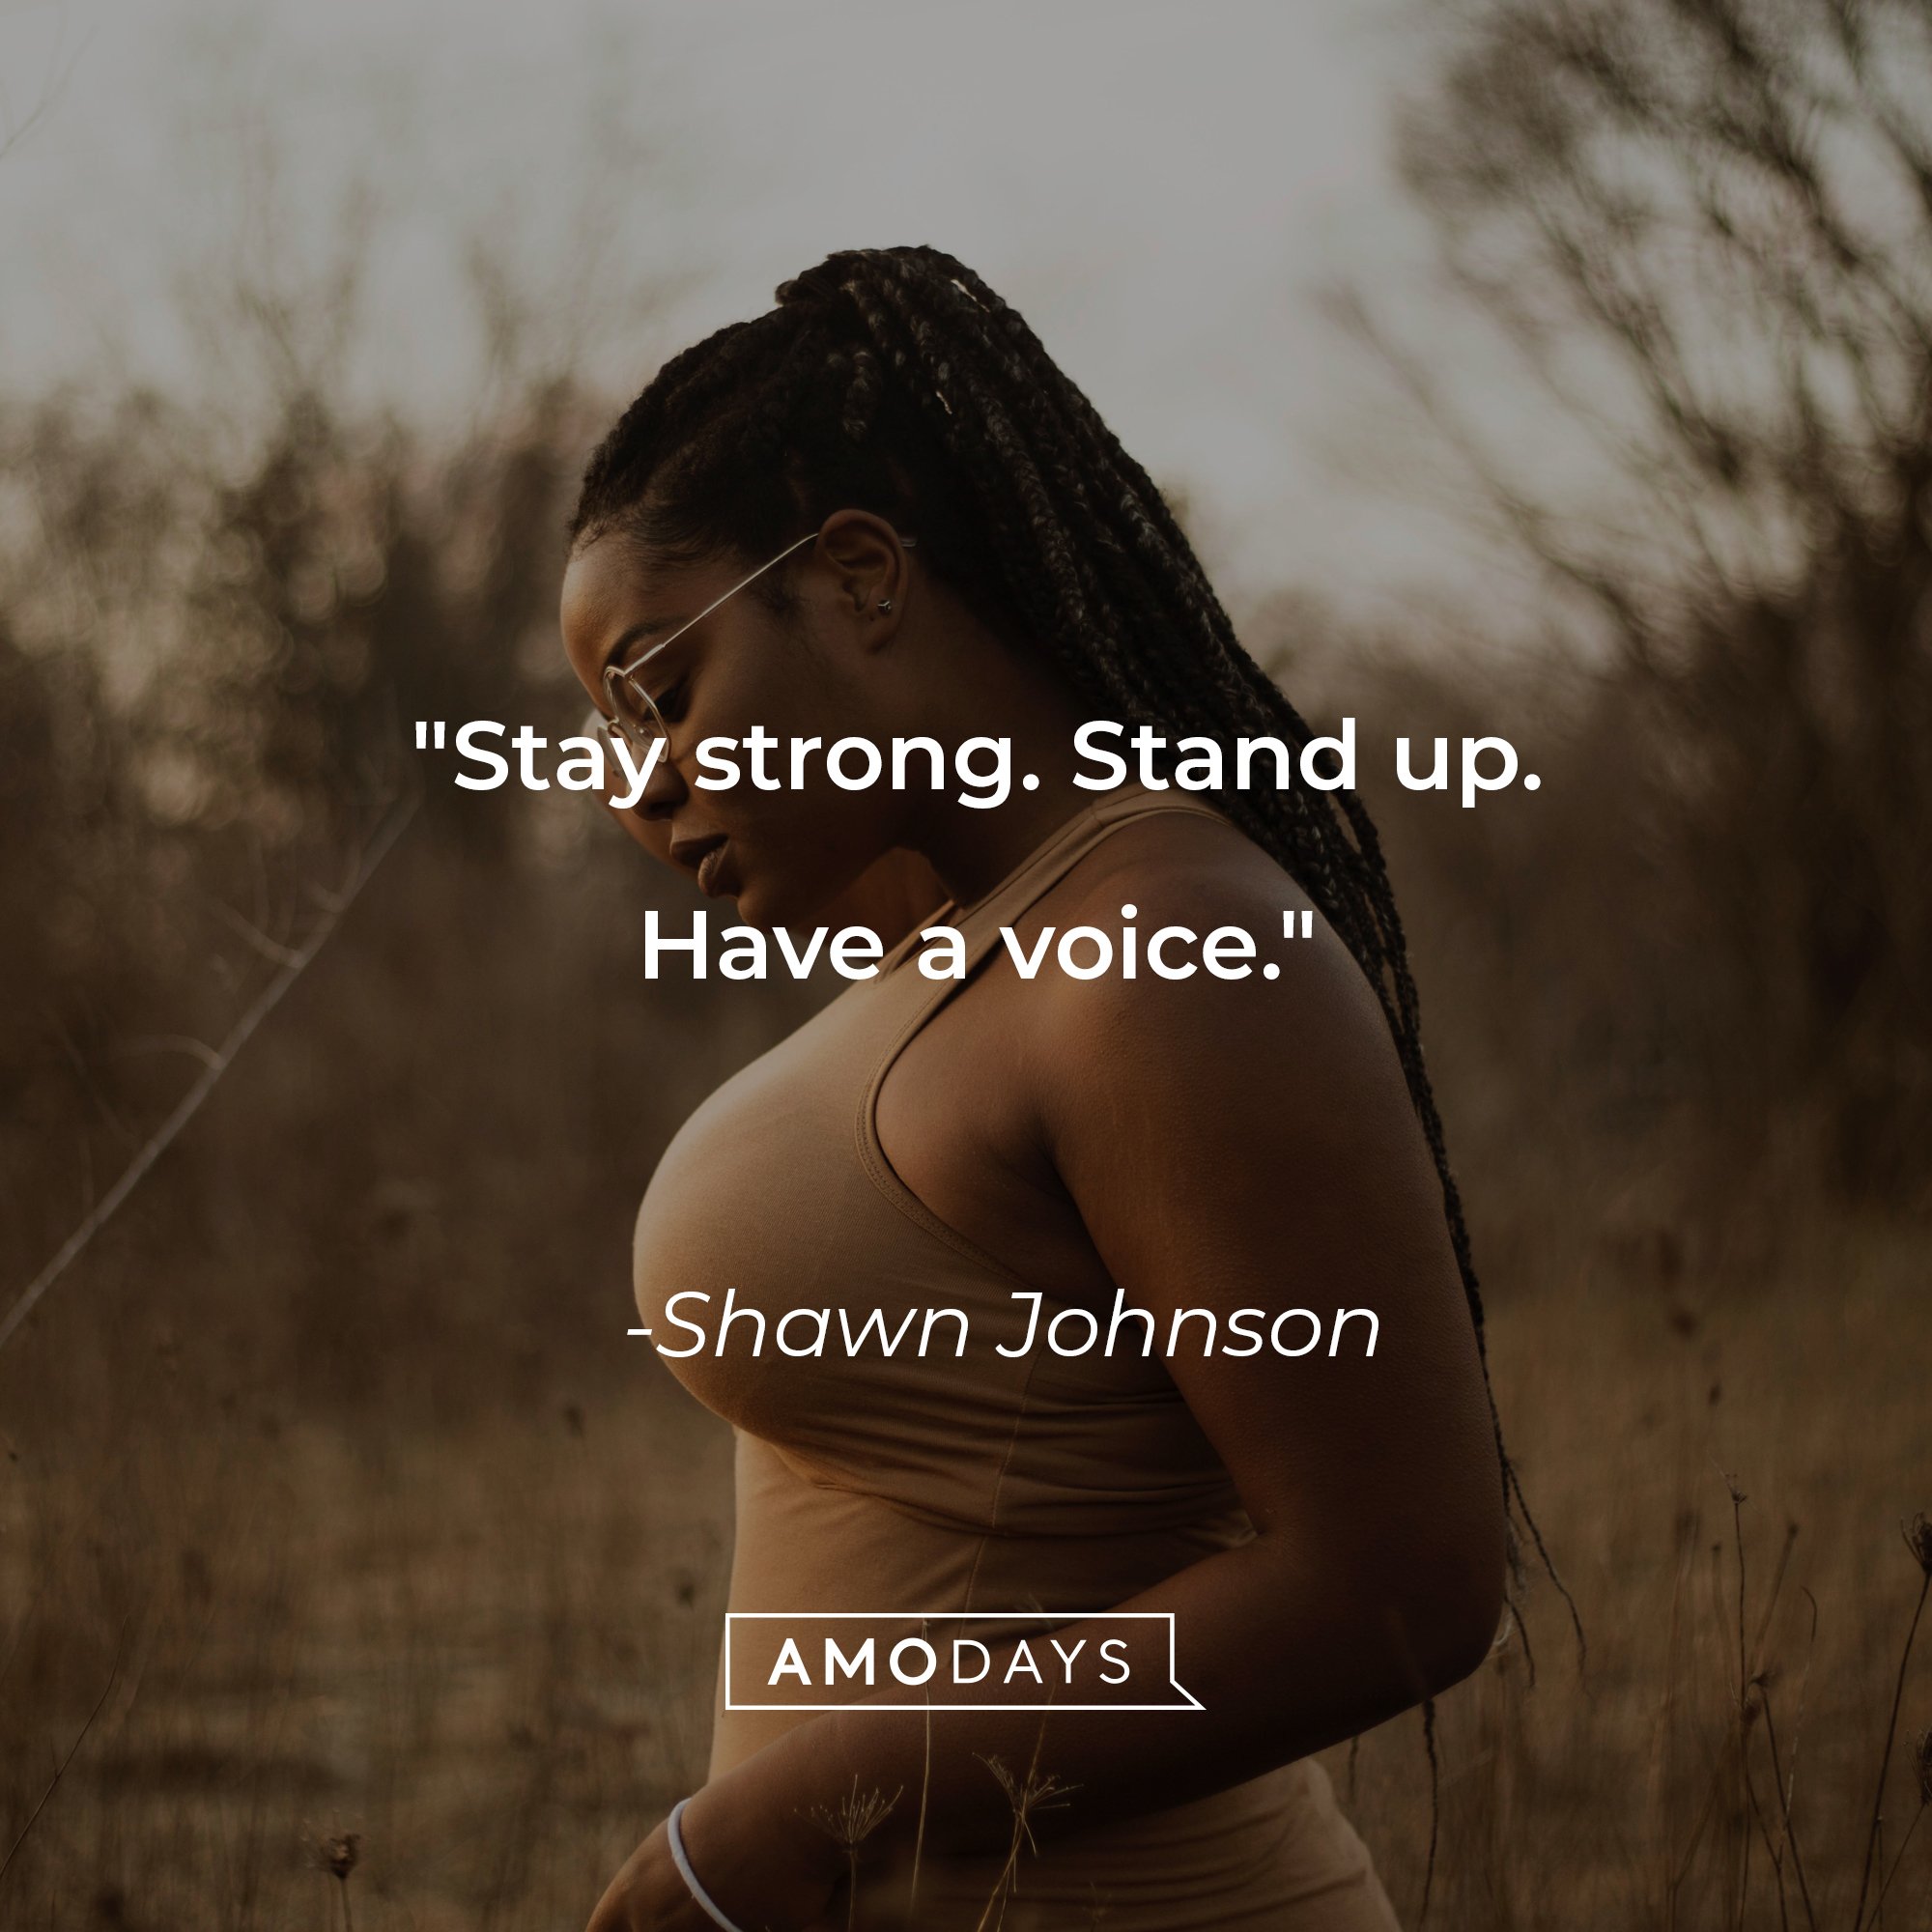 Shawn Johnson's quote: "Stay strong. Stand up. Have a voice." | Image: AmoDays